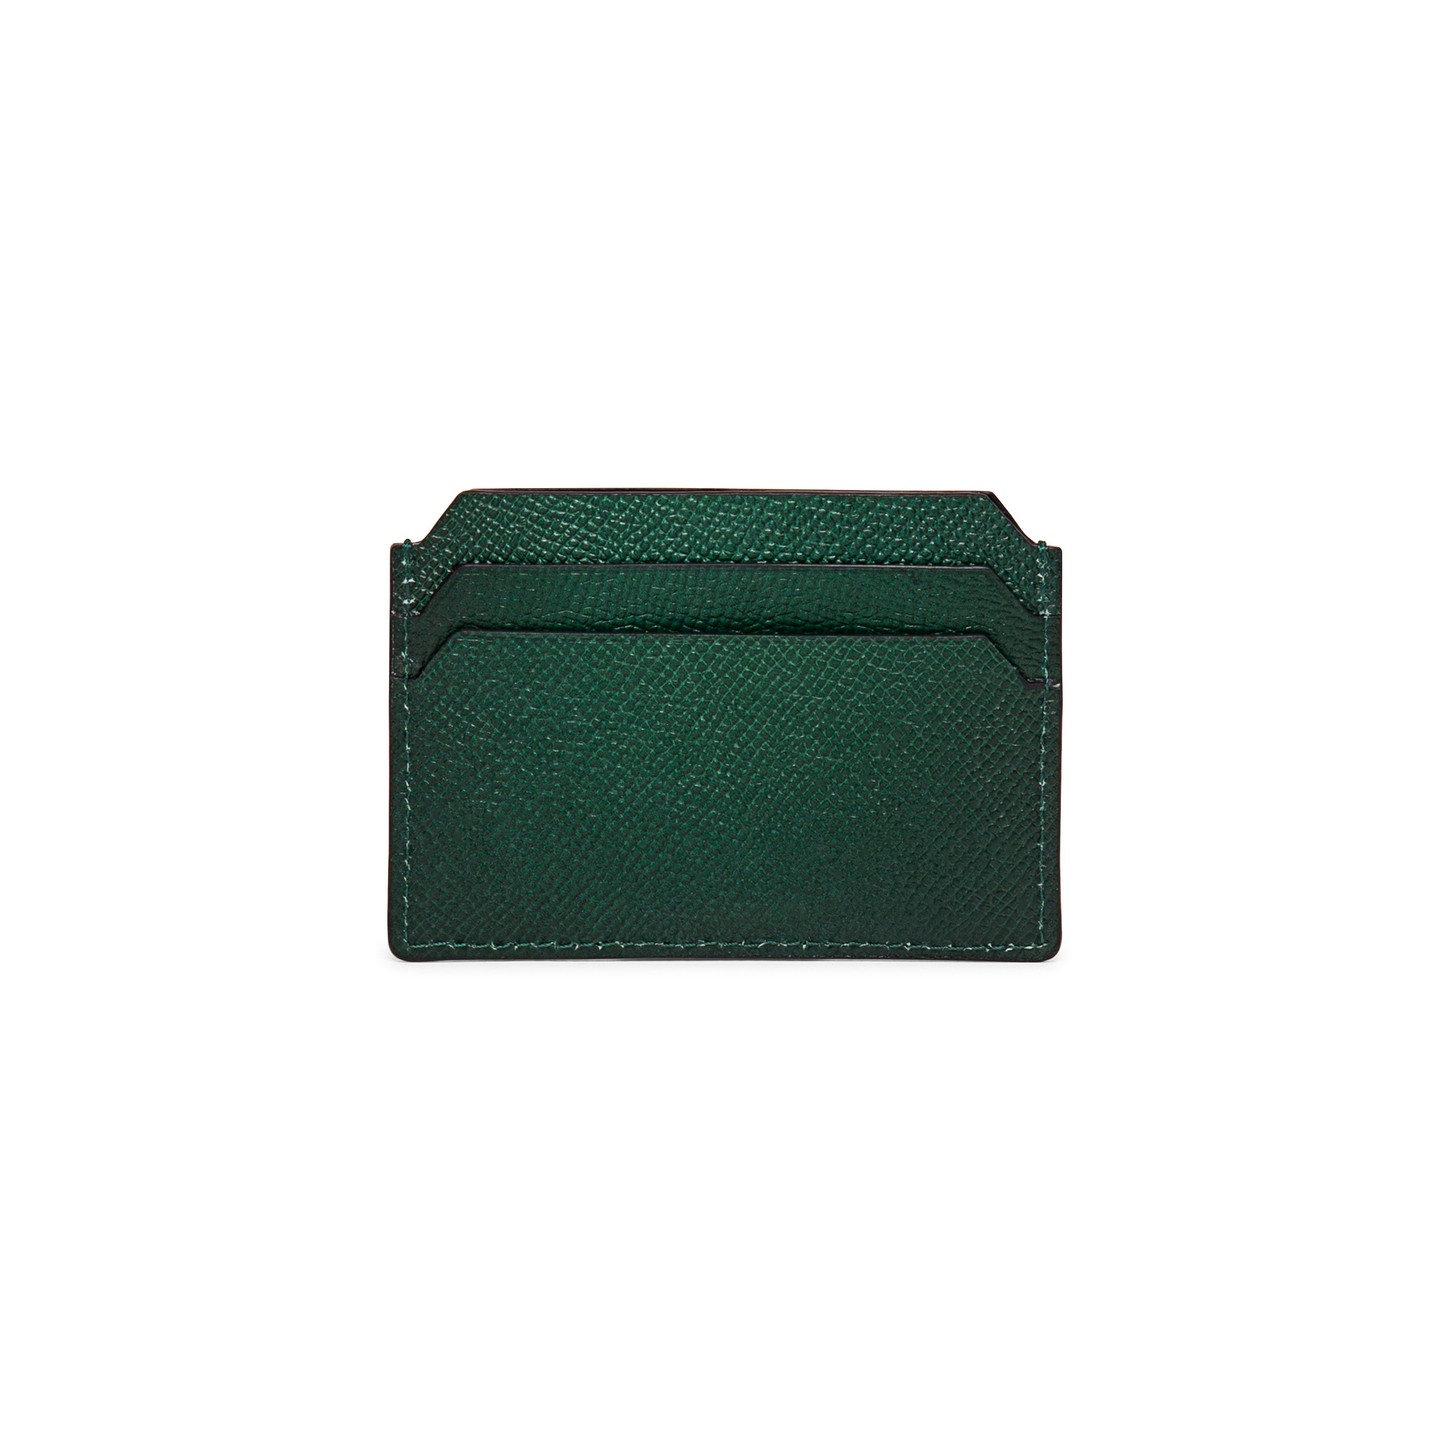 Green saffiano leather credit card holder - 2